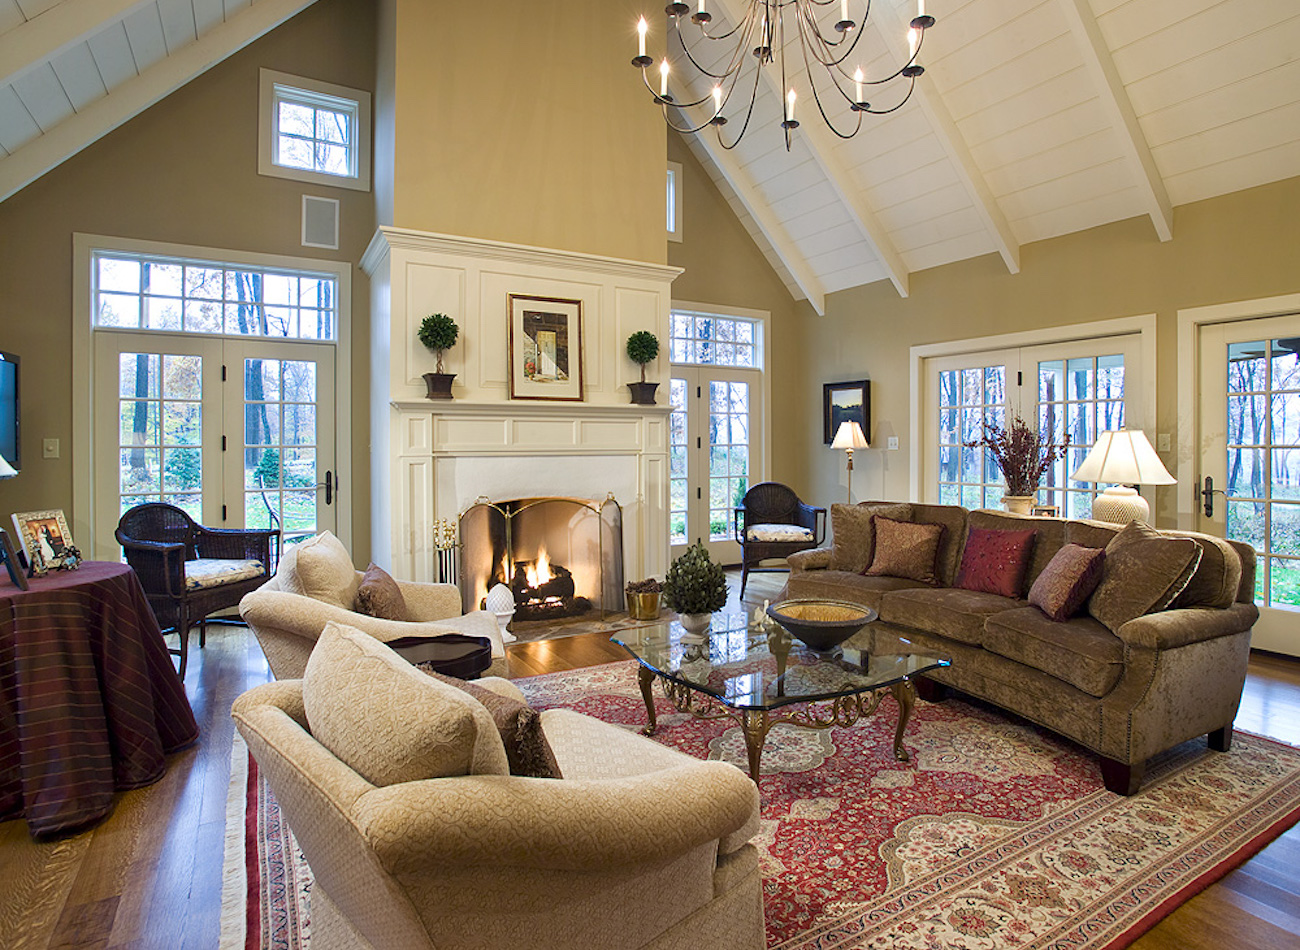 Living room with fireplace and chandelier in an olde bulltown home